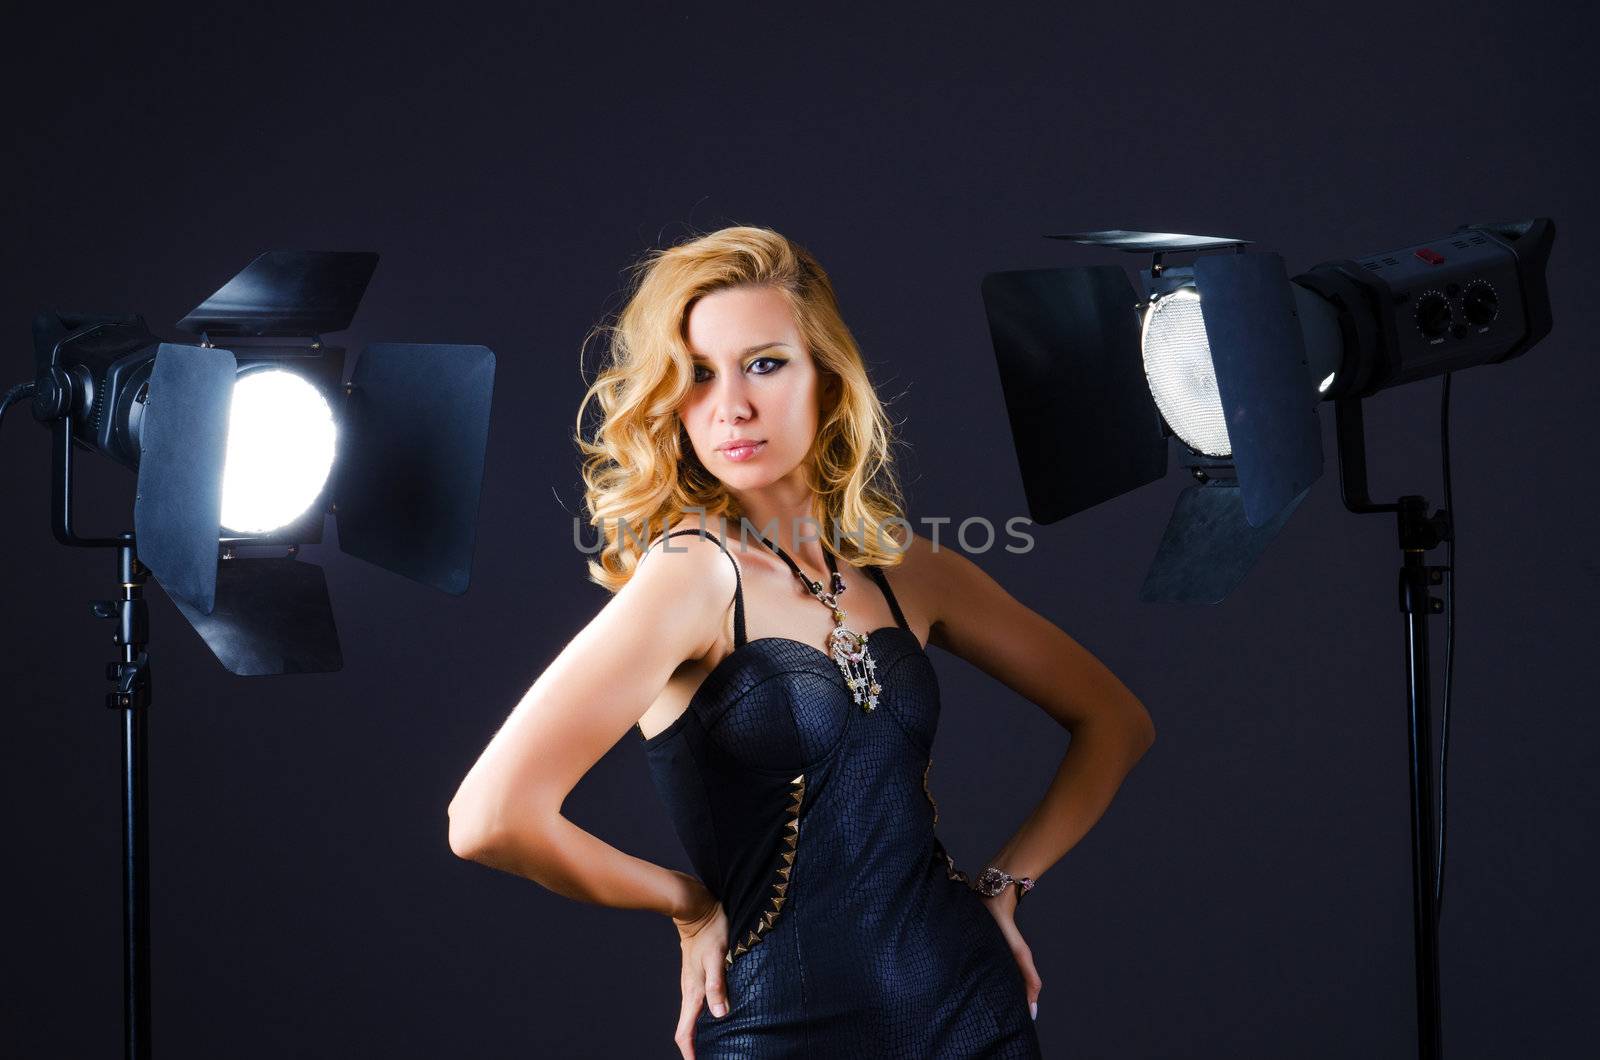 Young attractive woman in photo studio